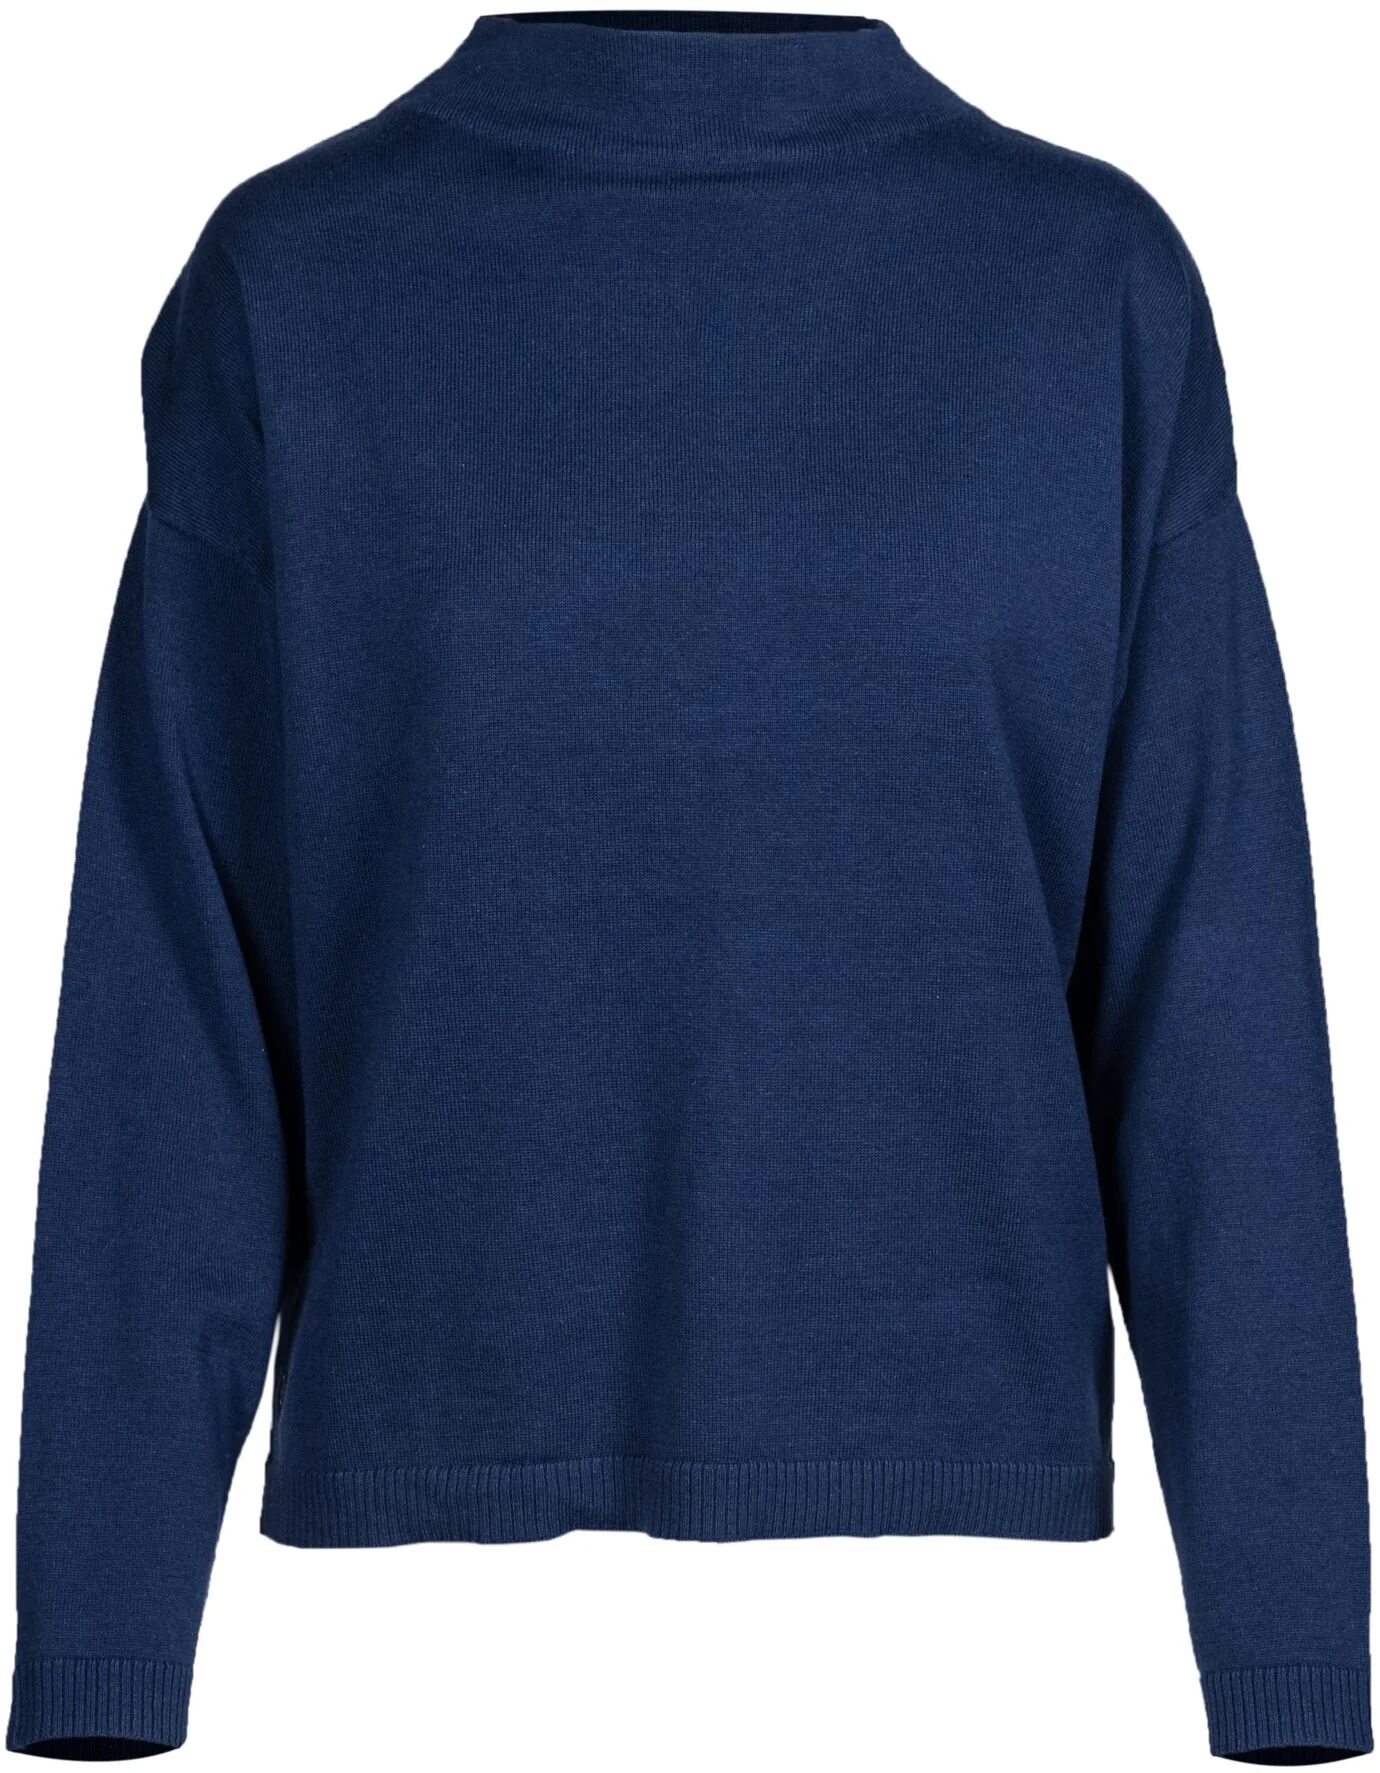 Levelwear Verve Womens Poise Golf Sweater - Blue, Size: Small